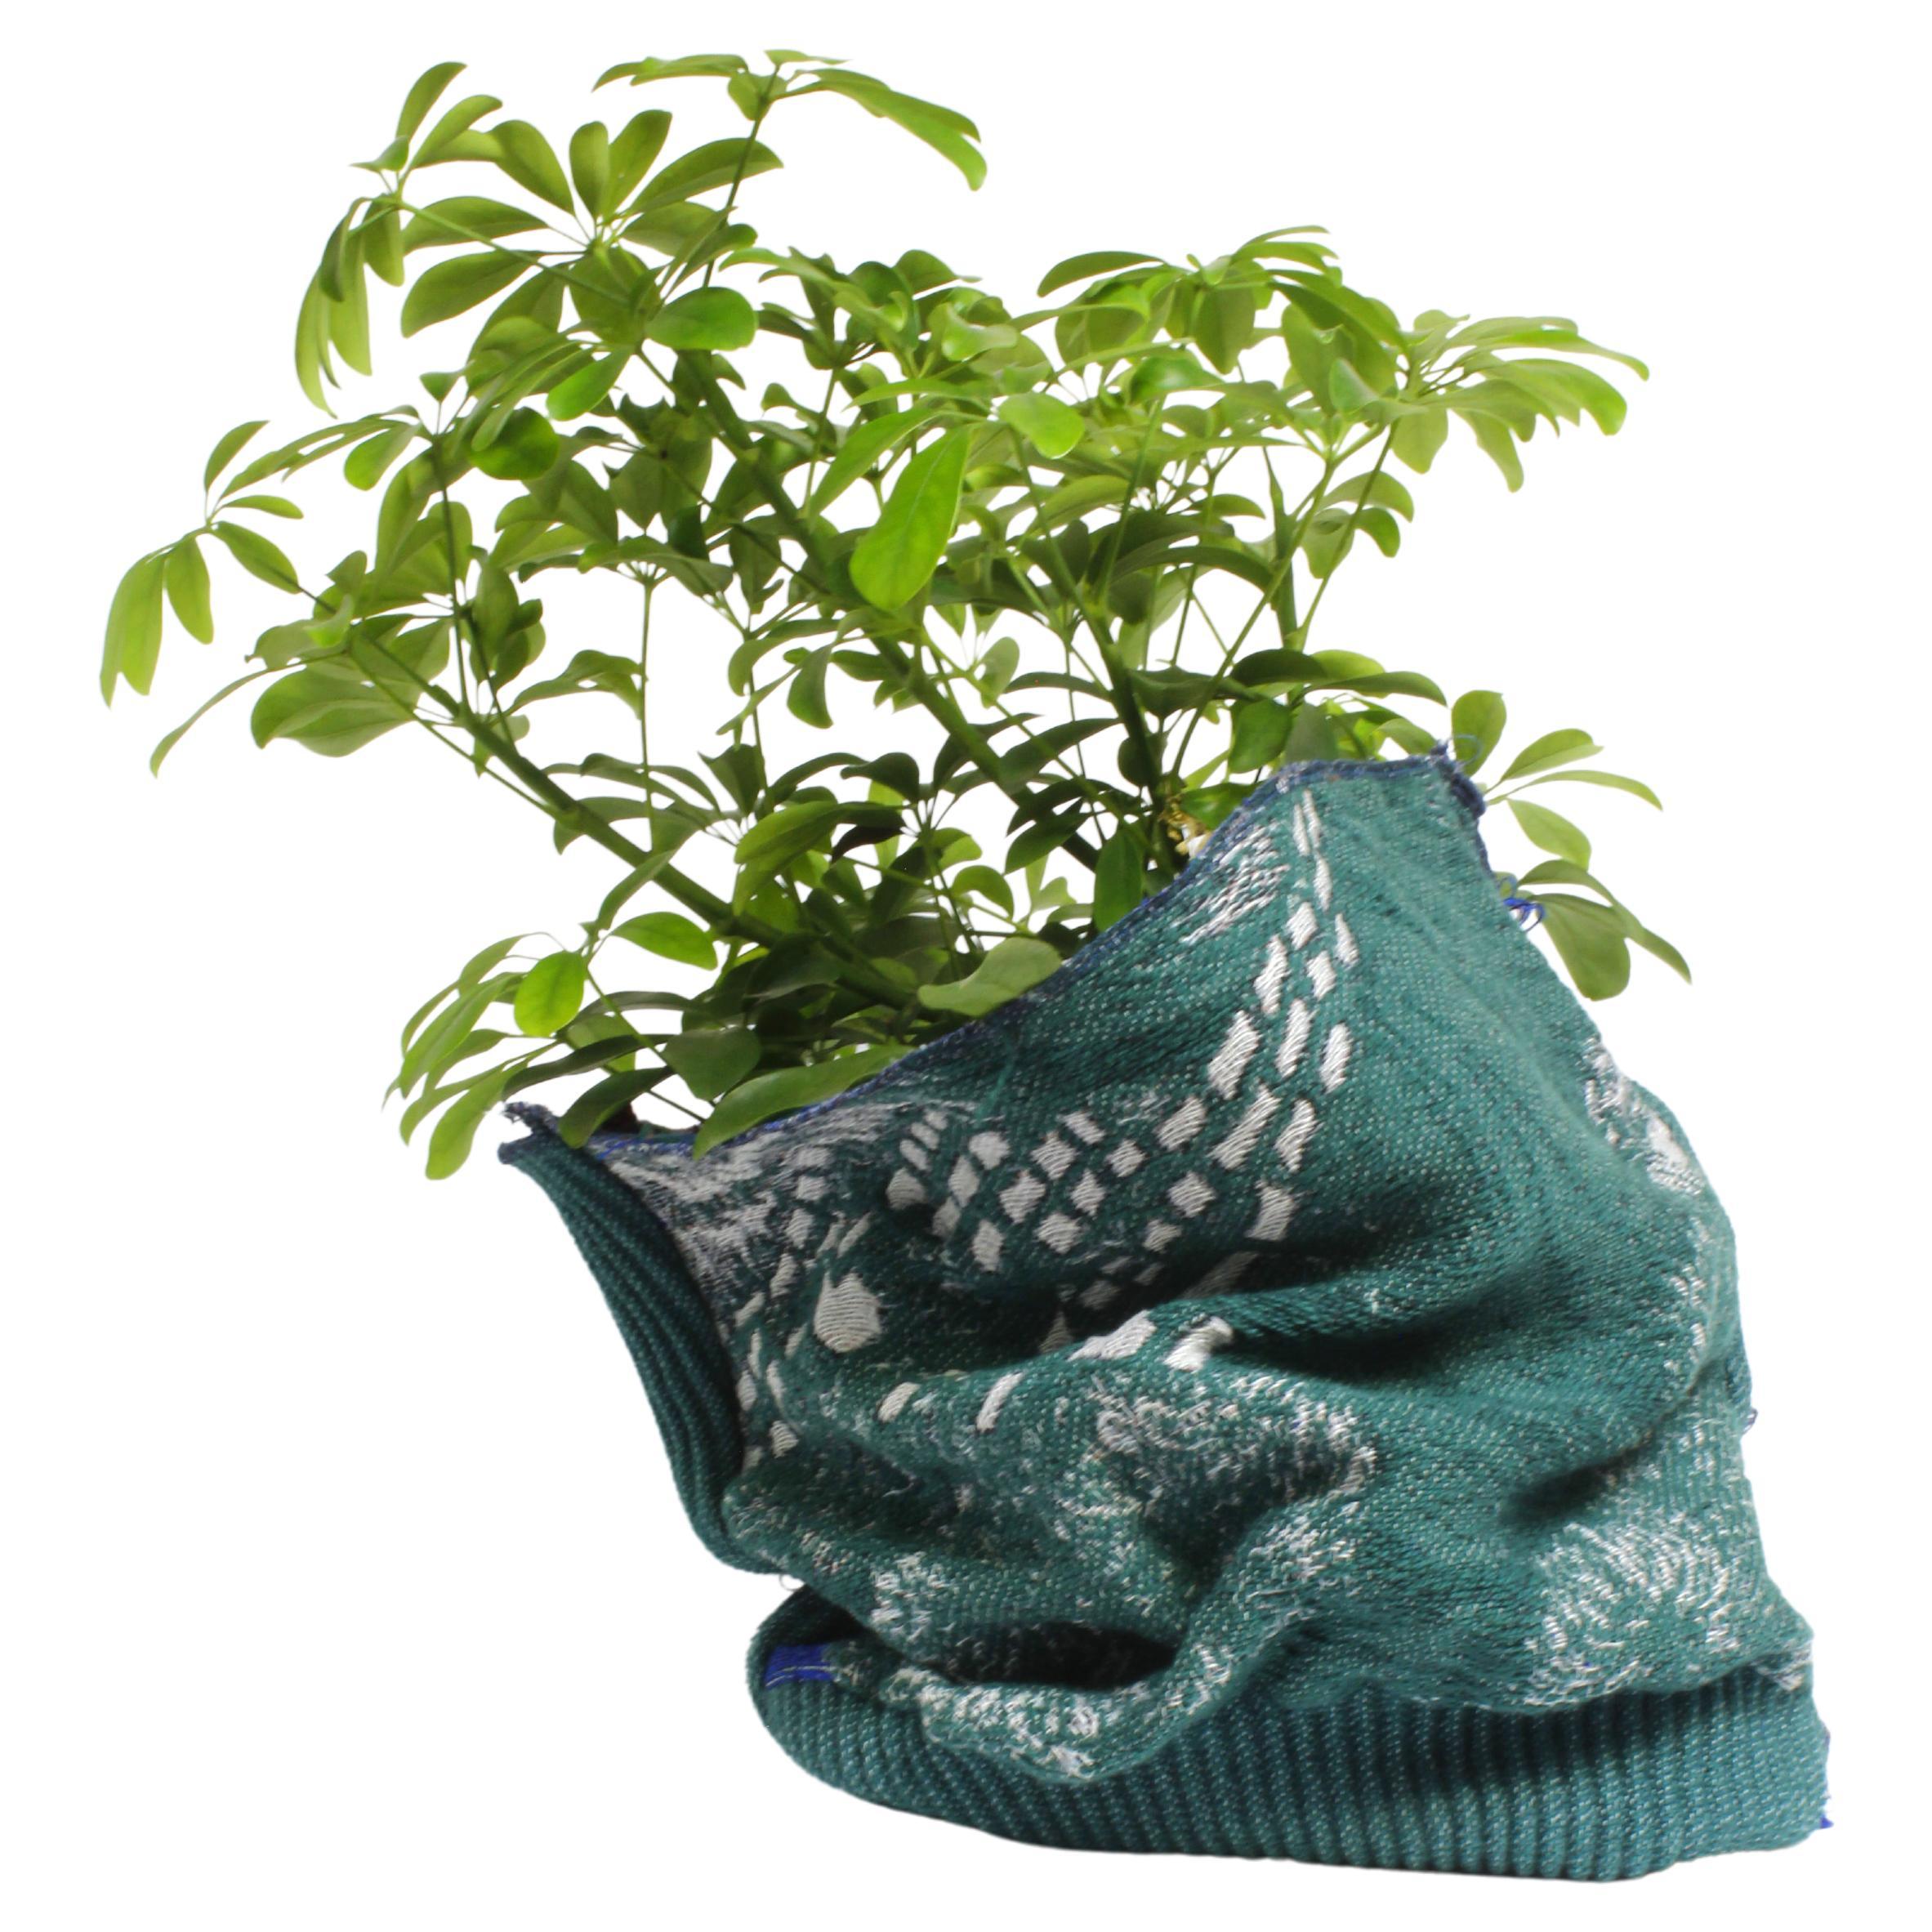 Planter hider woven textile elastic pocket based on a drawing